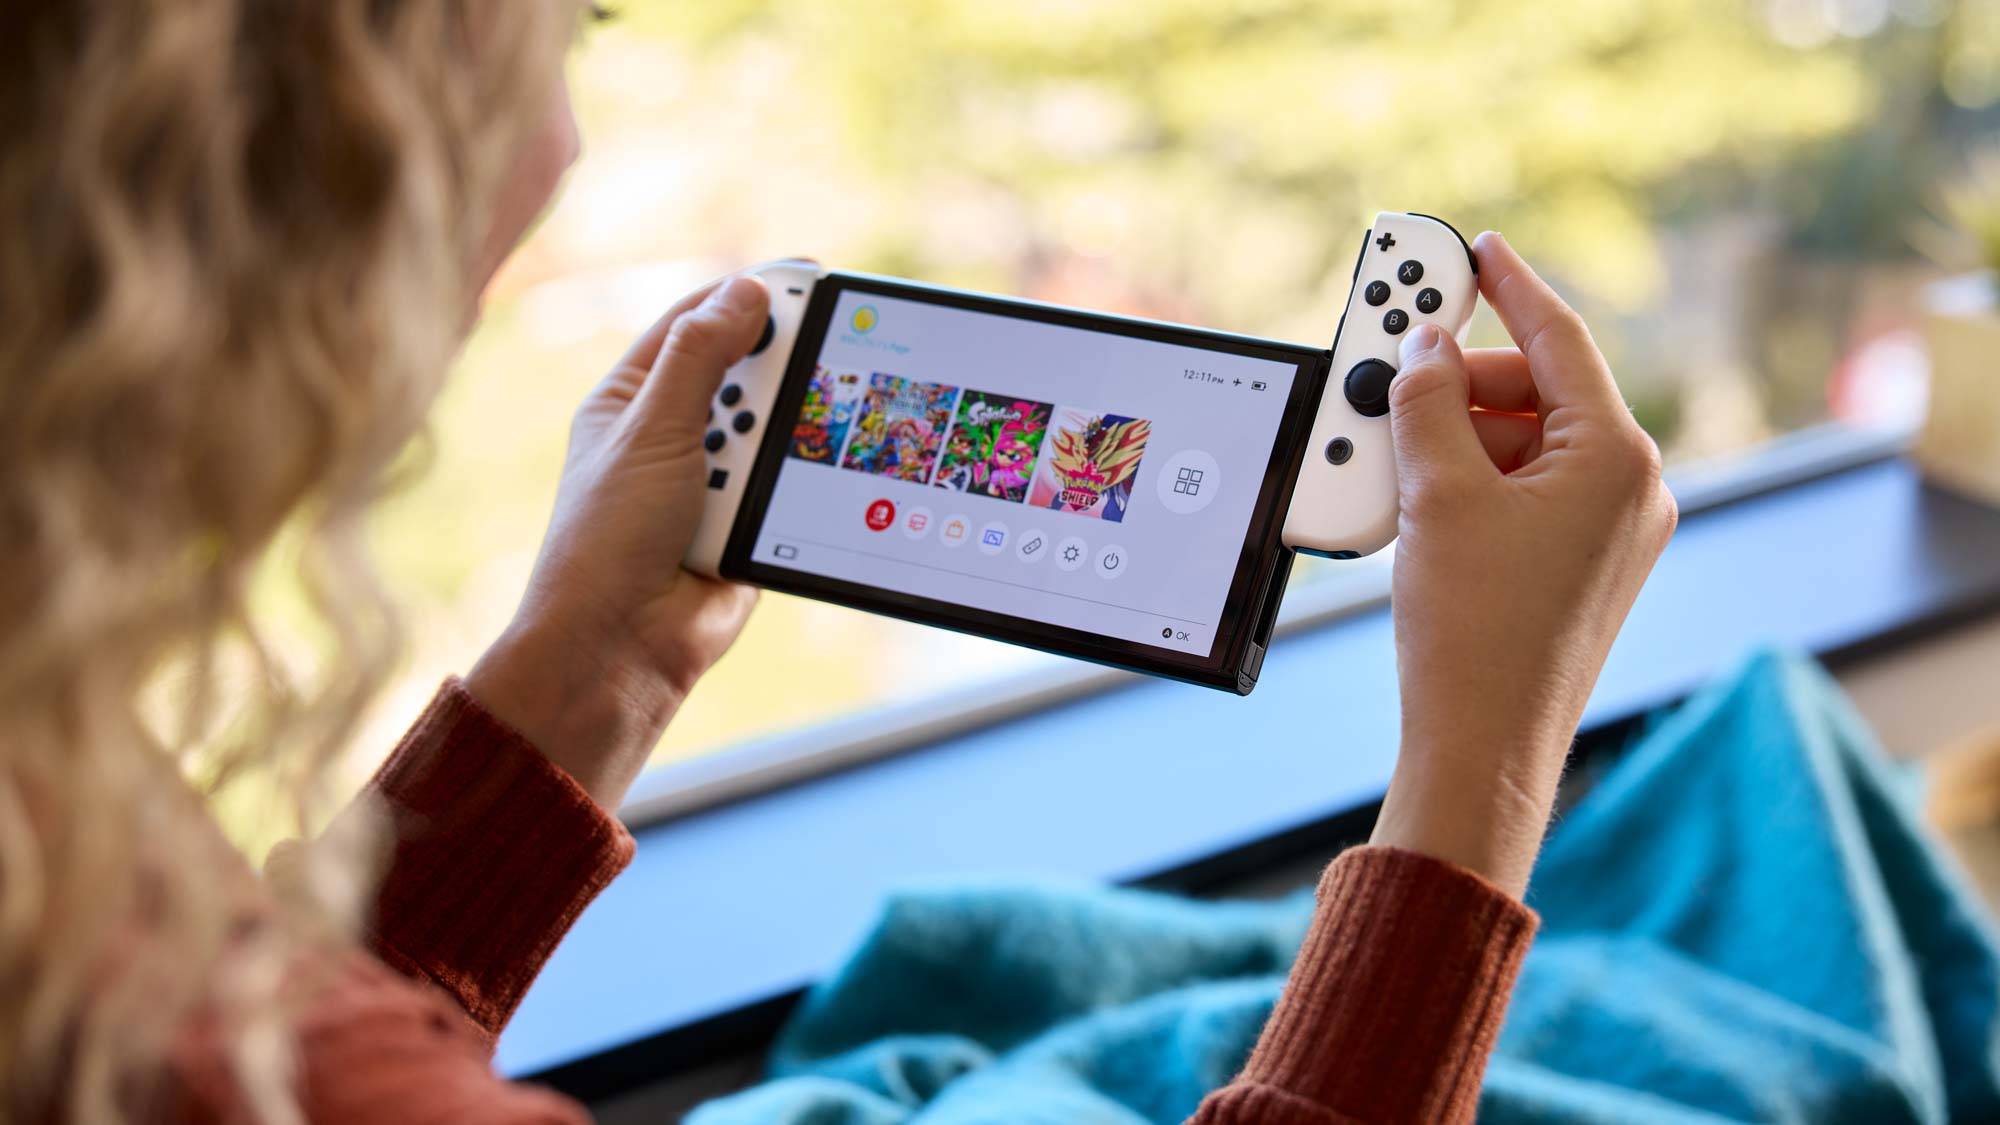 nintendo switch 2 release date — latest rumors and our prediction